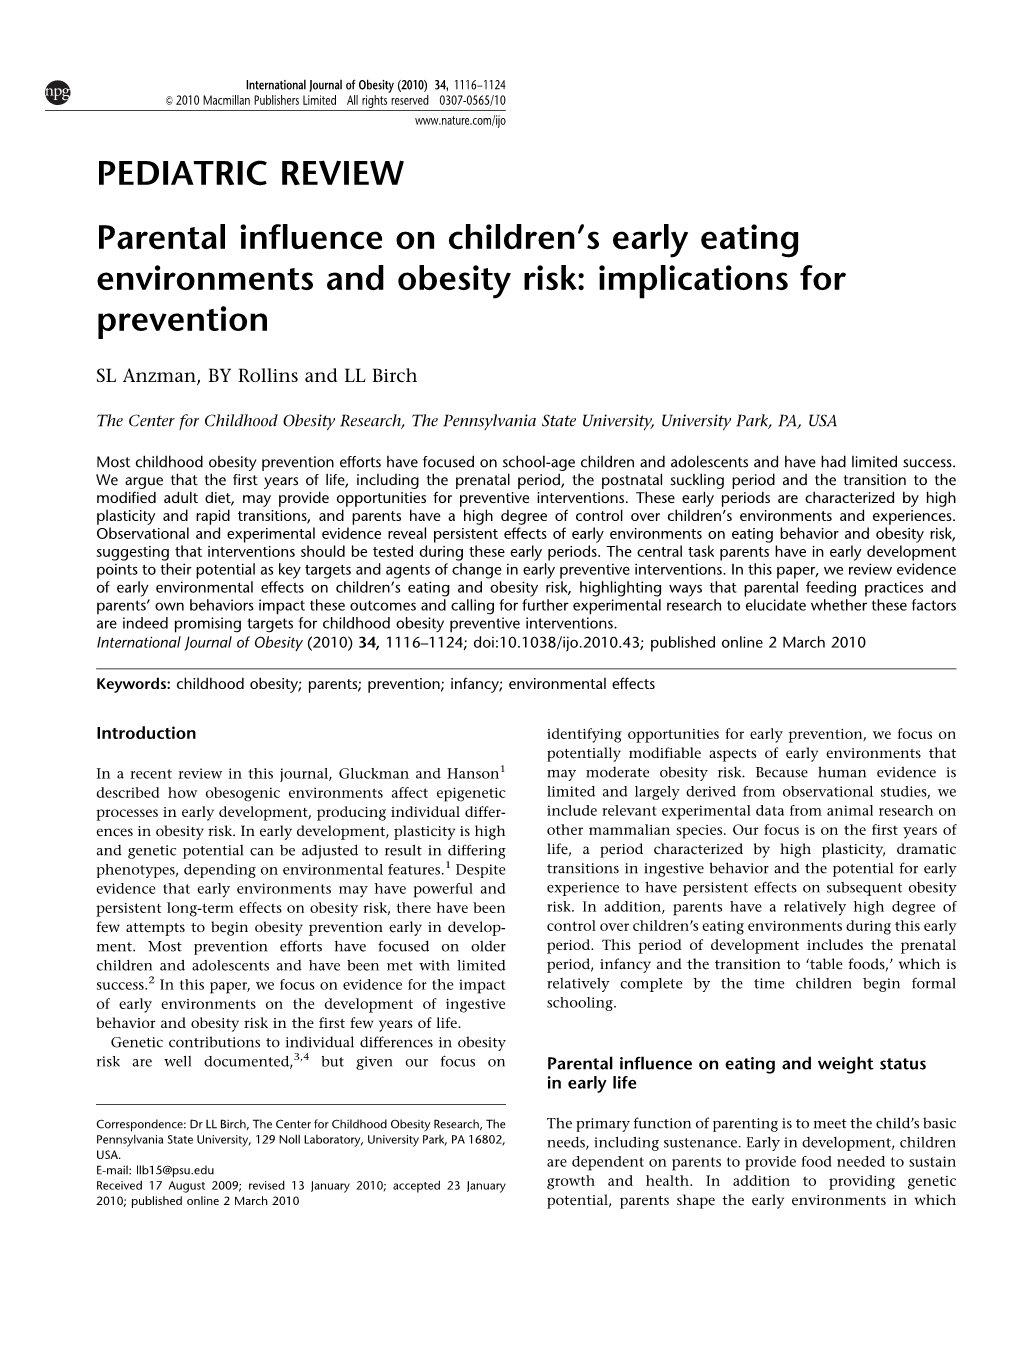 S Early Eating Environments and Obesity Risk: Implications for Prevention